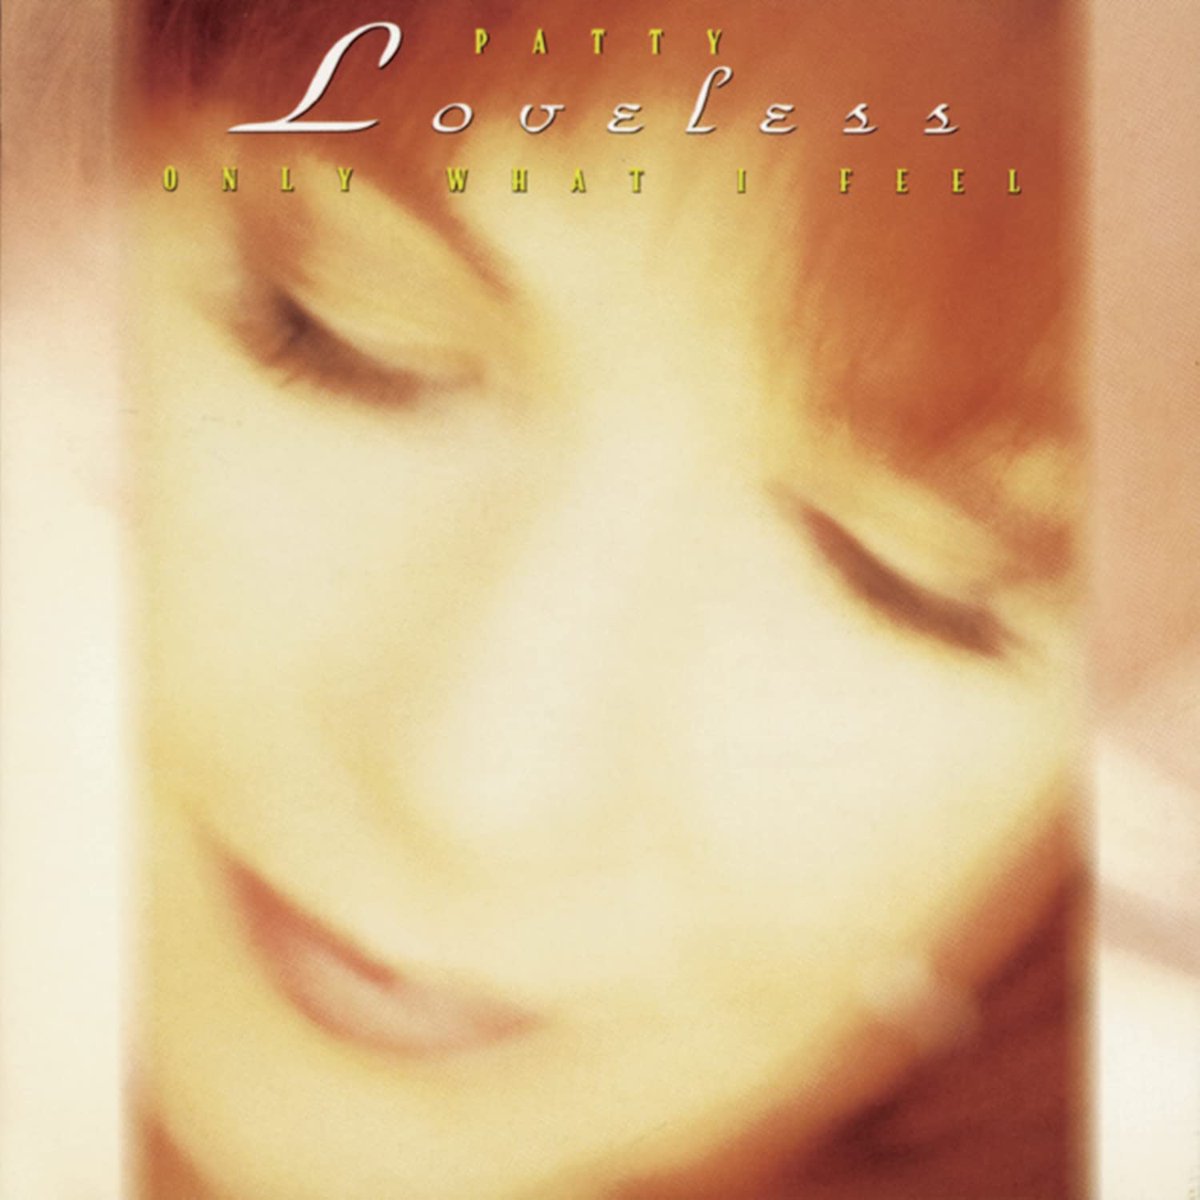 #nowplaying on @meridianfm ‘Blame It on Your Heart’ by @theploveless from her 1993 album “Only What I Feel” #countryradio #countrymusic #womenofcountry #classiccountry